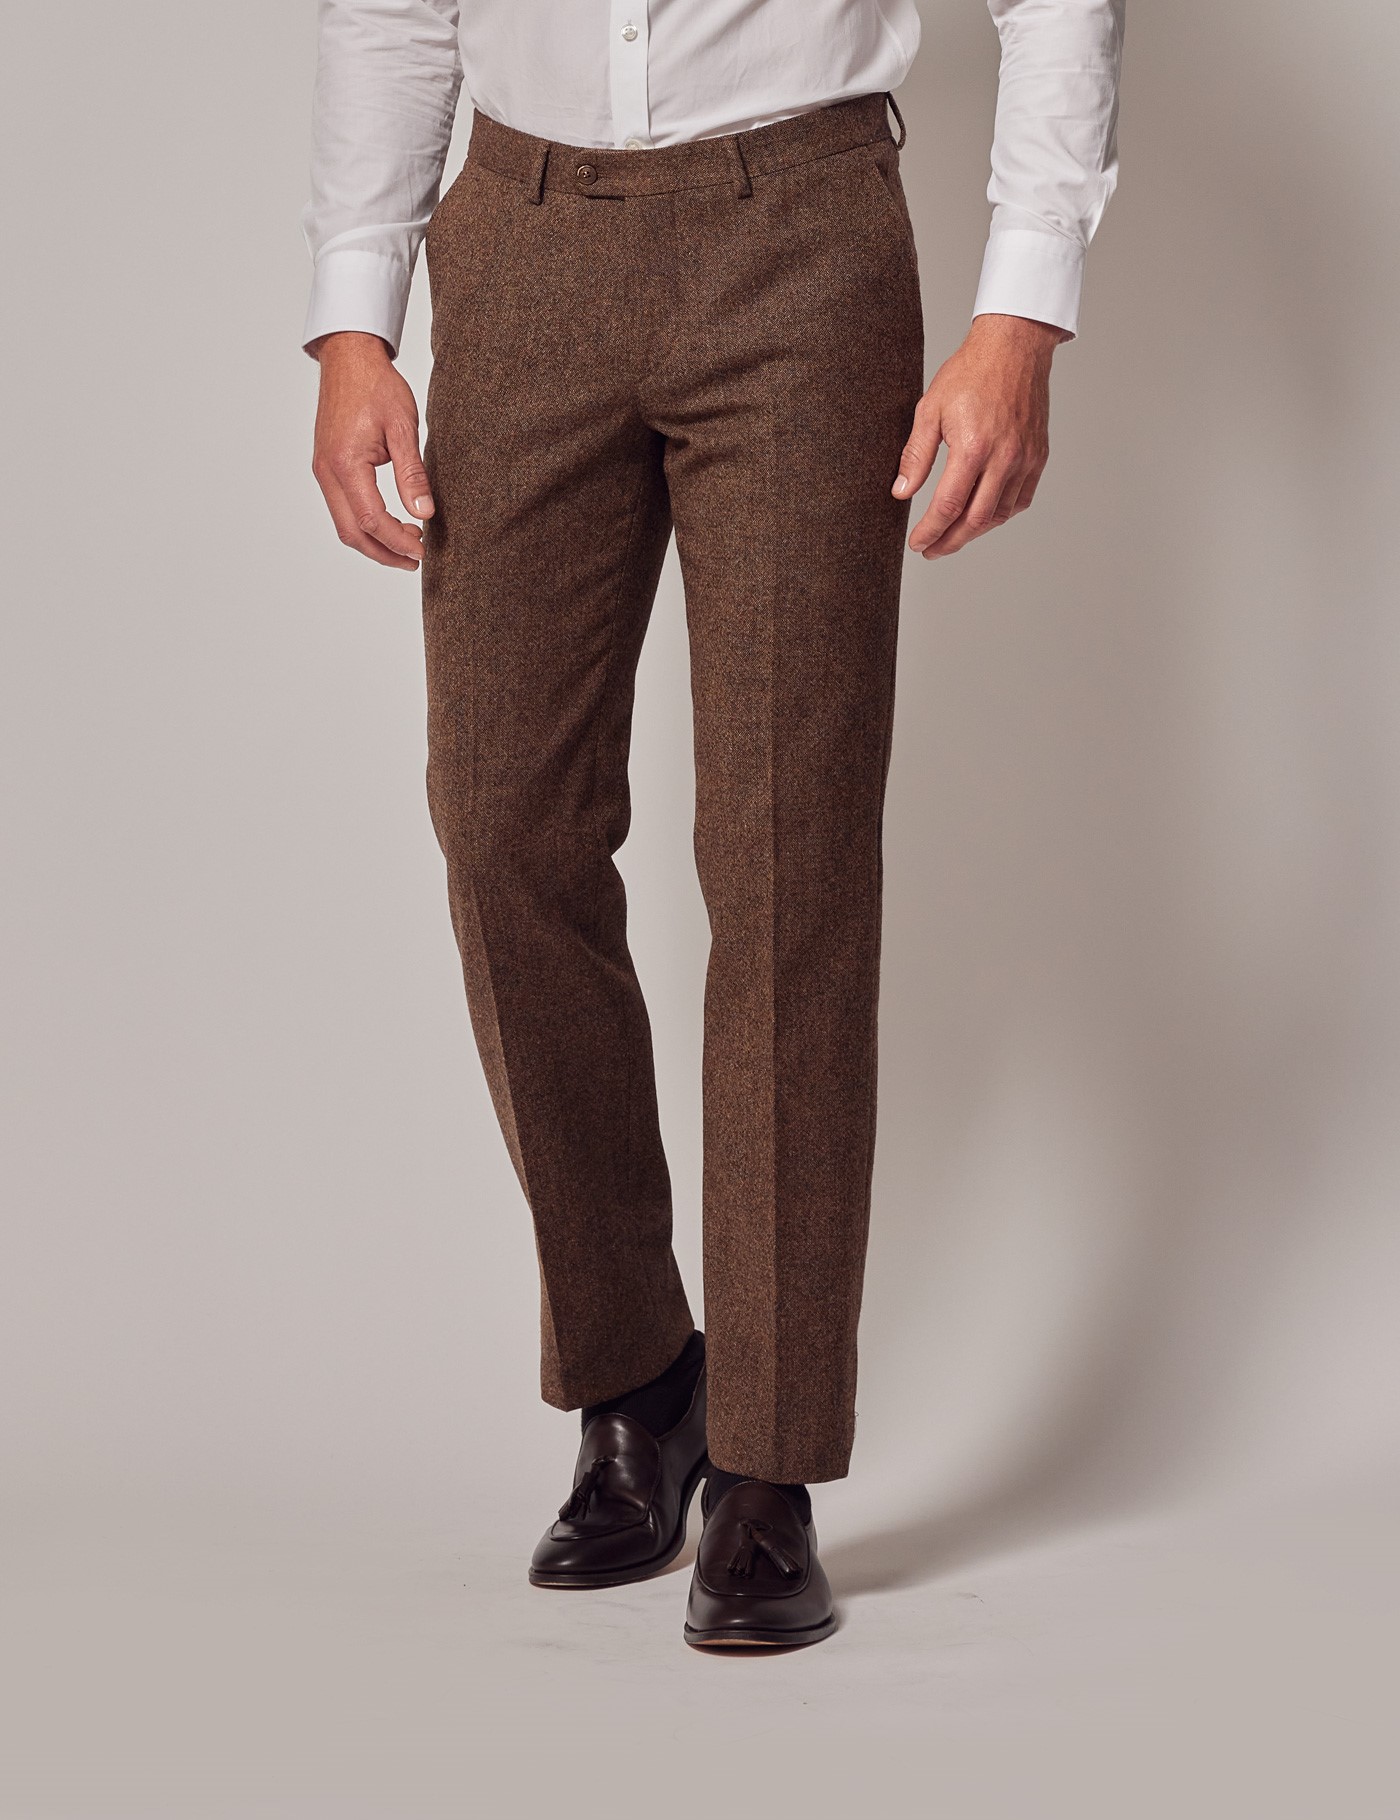 Buy Men Brown Comfort Fit Solid Business Casual Trousers Online - 262141 |  Allen Solly